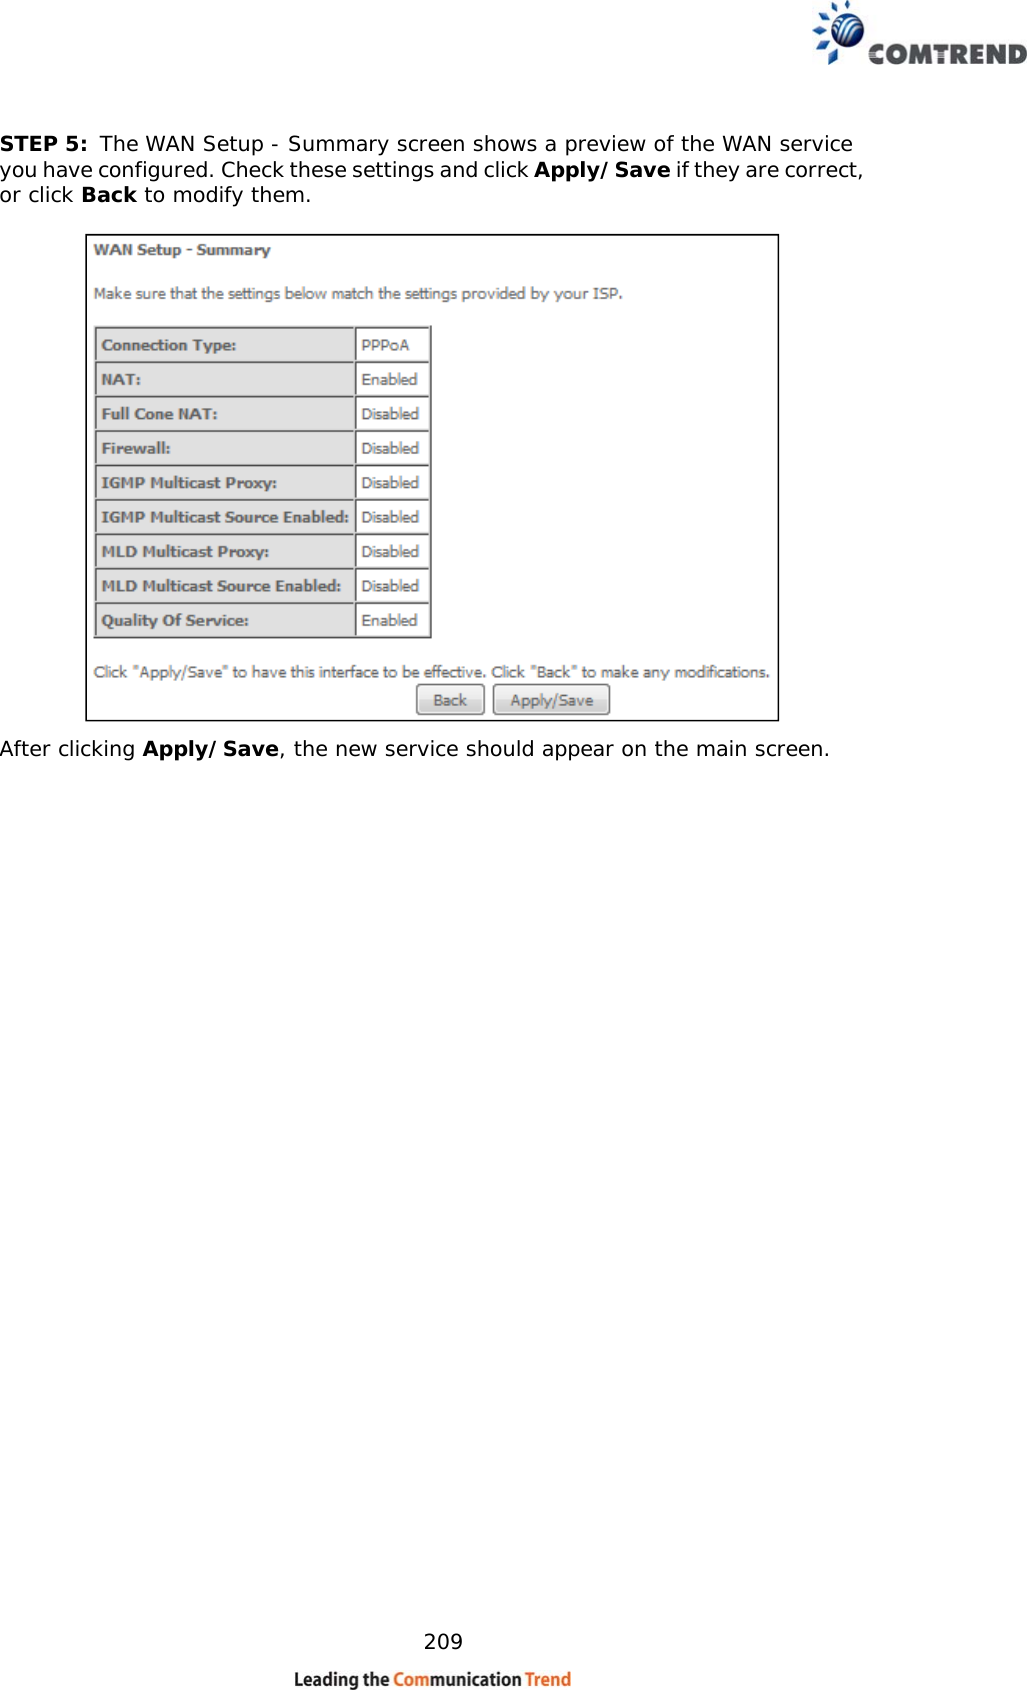    209 STEP 5:  The WAN Setup - Summary screen shows a preview of the WAN service you have configured. Check these settings and click Apply/Save if they are correct, or click Back to modify them.   After clicking Apply/Save, the new service should appear on the main screen.  